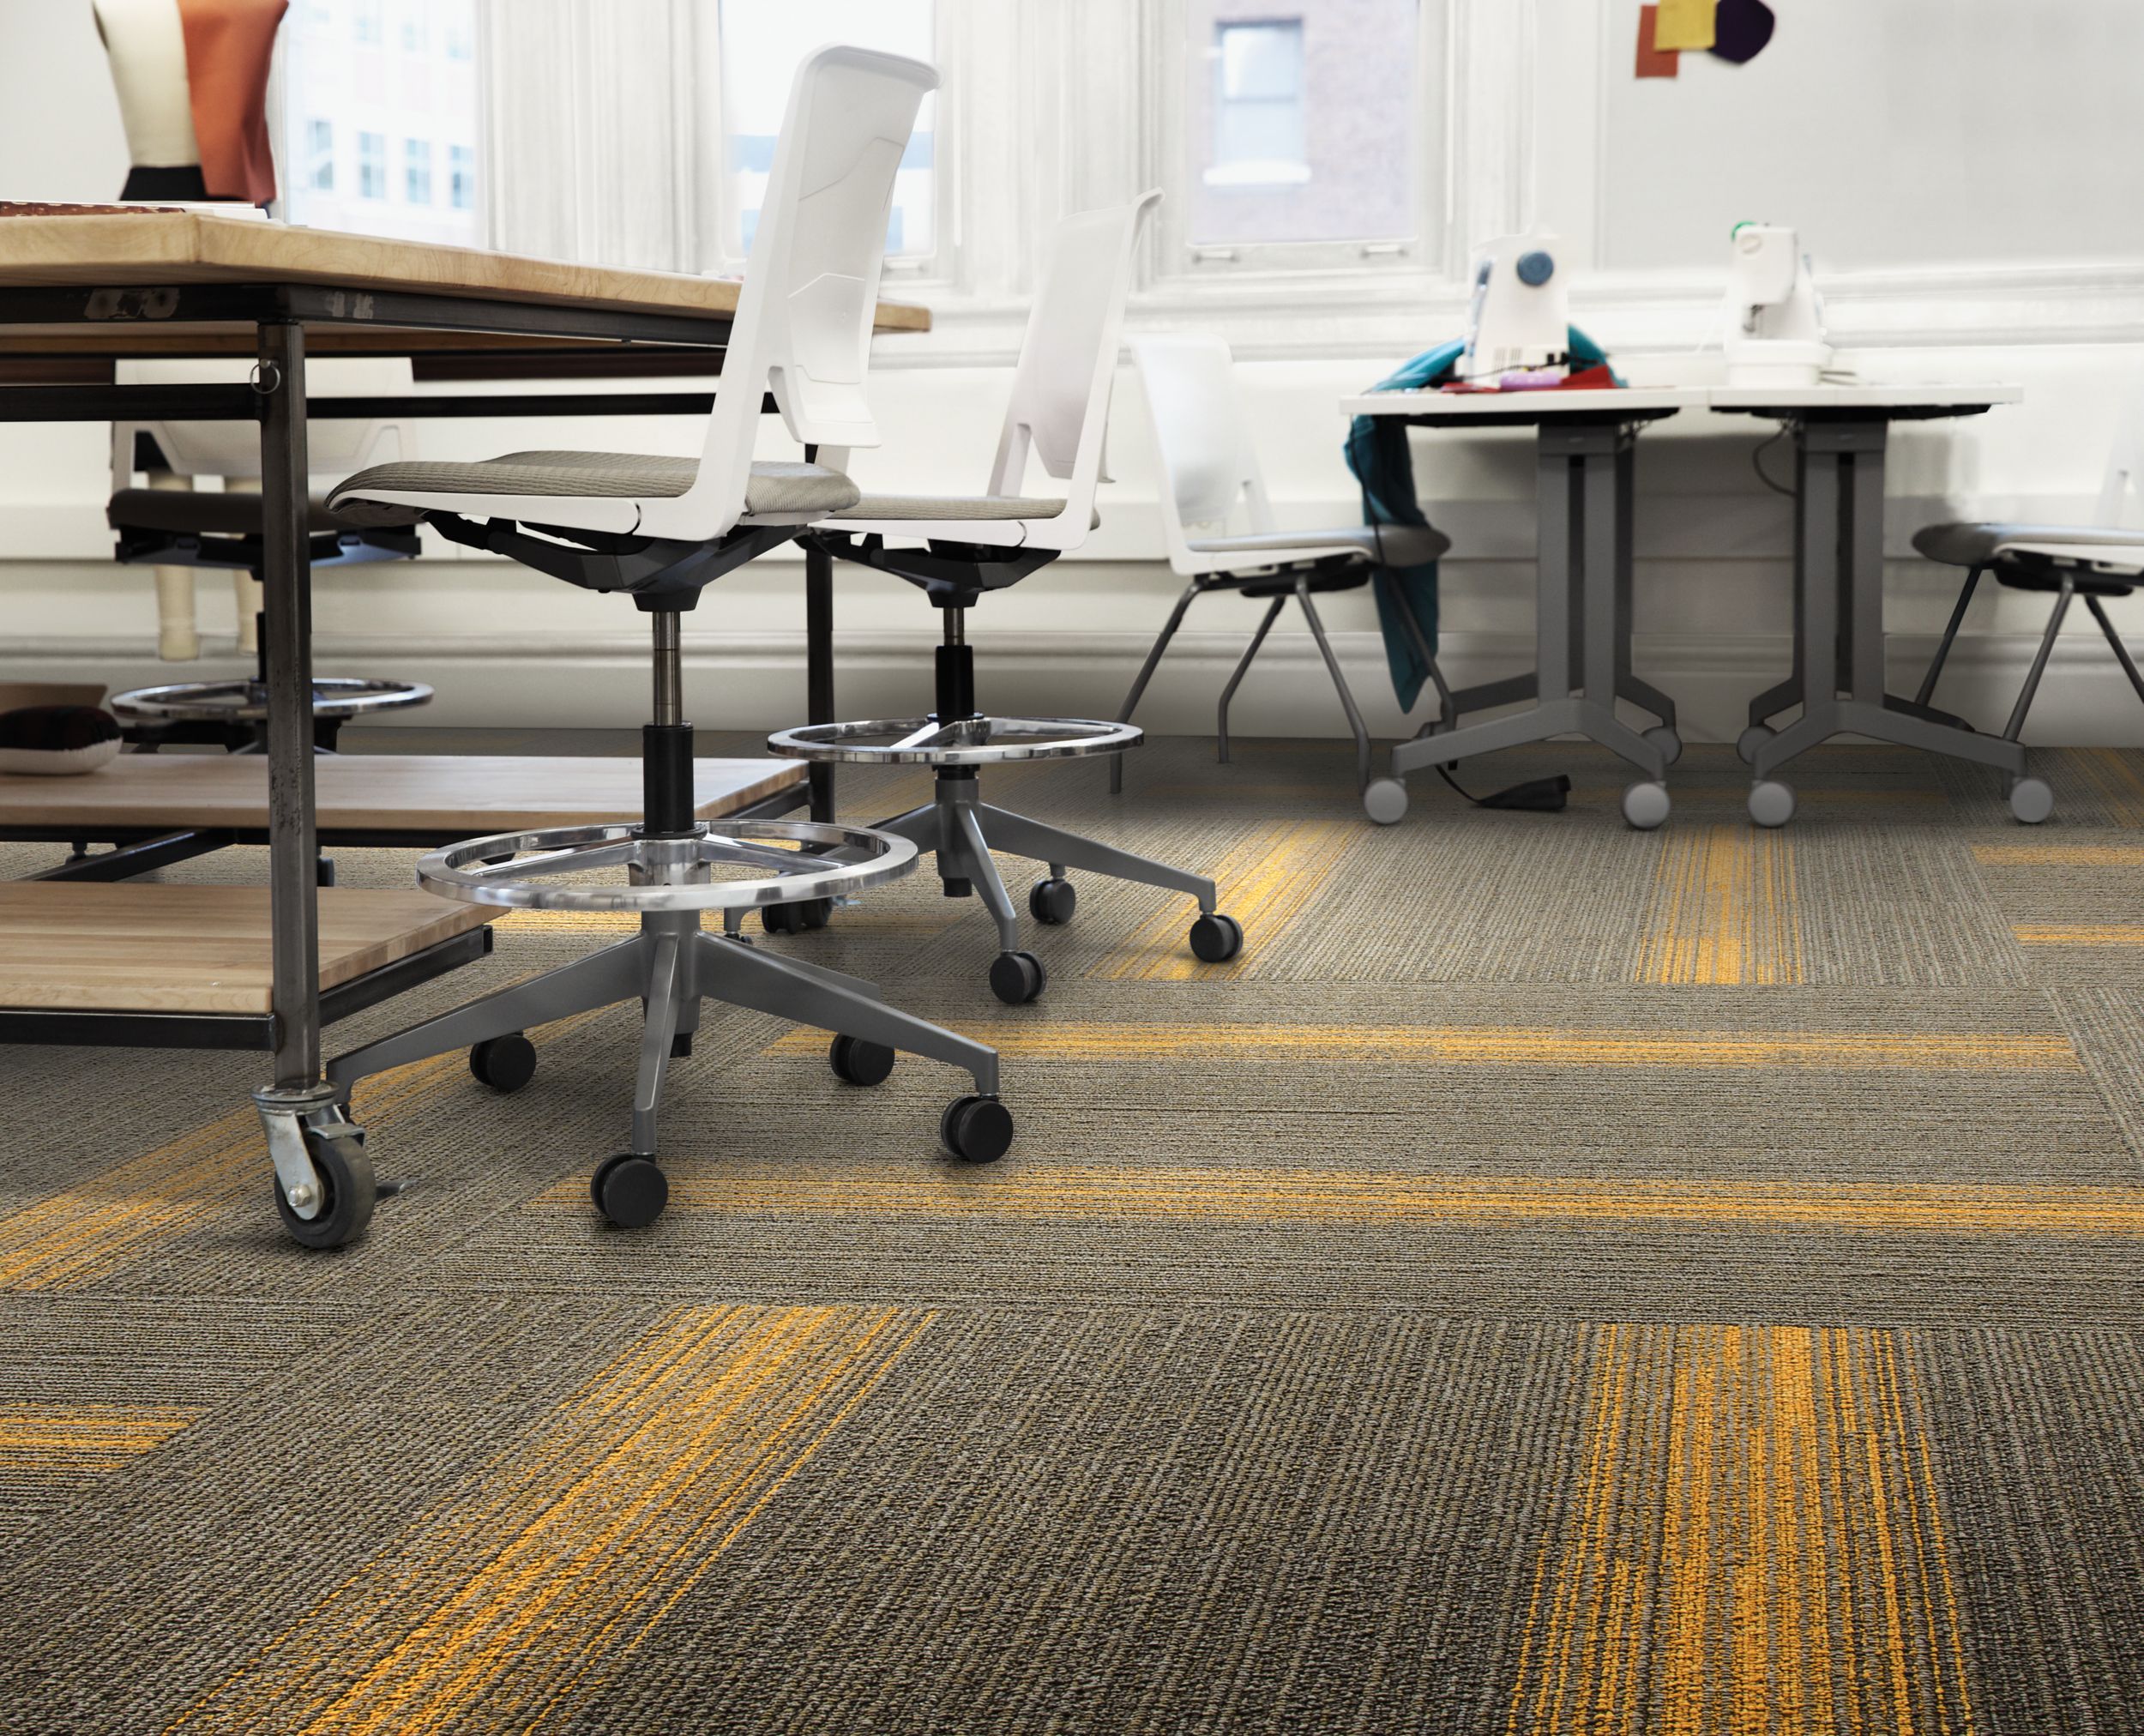 Interface Off Line plank carpet tile with sewing machines at workspaces image number 7